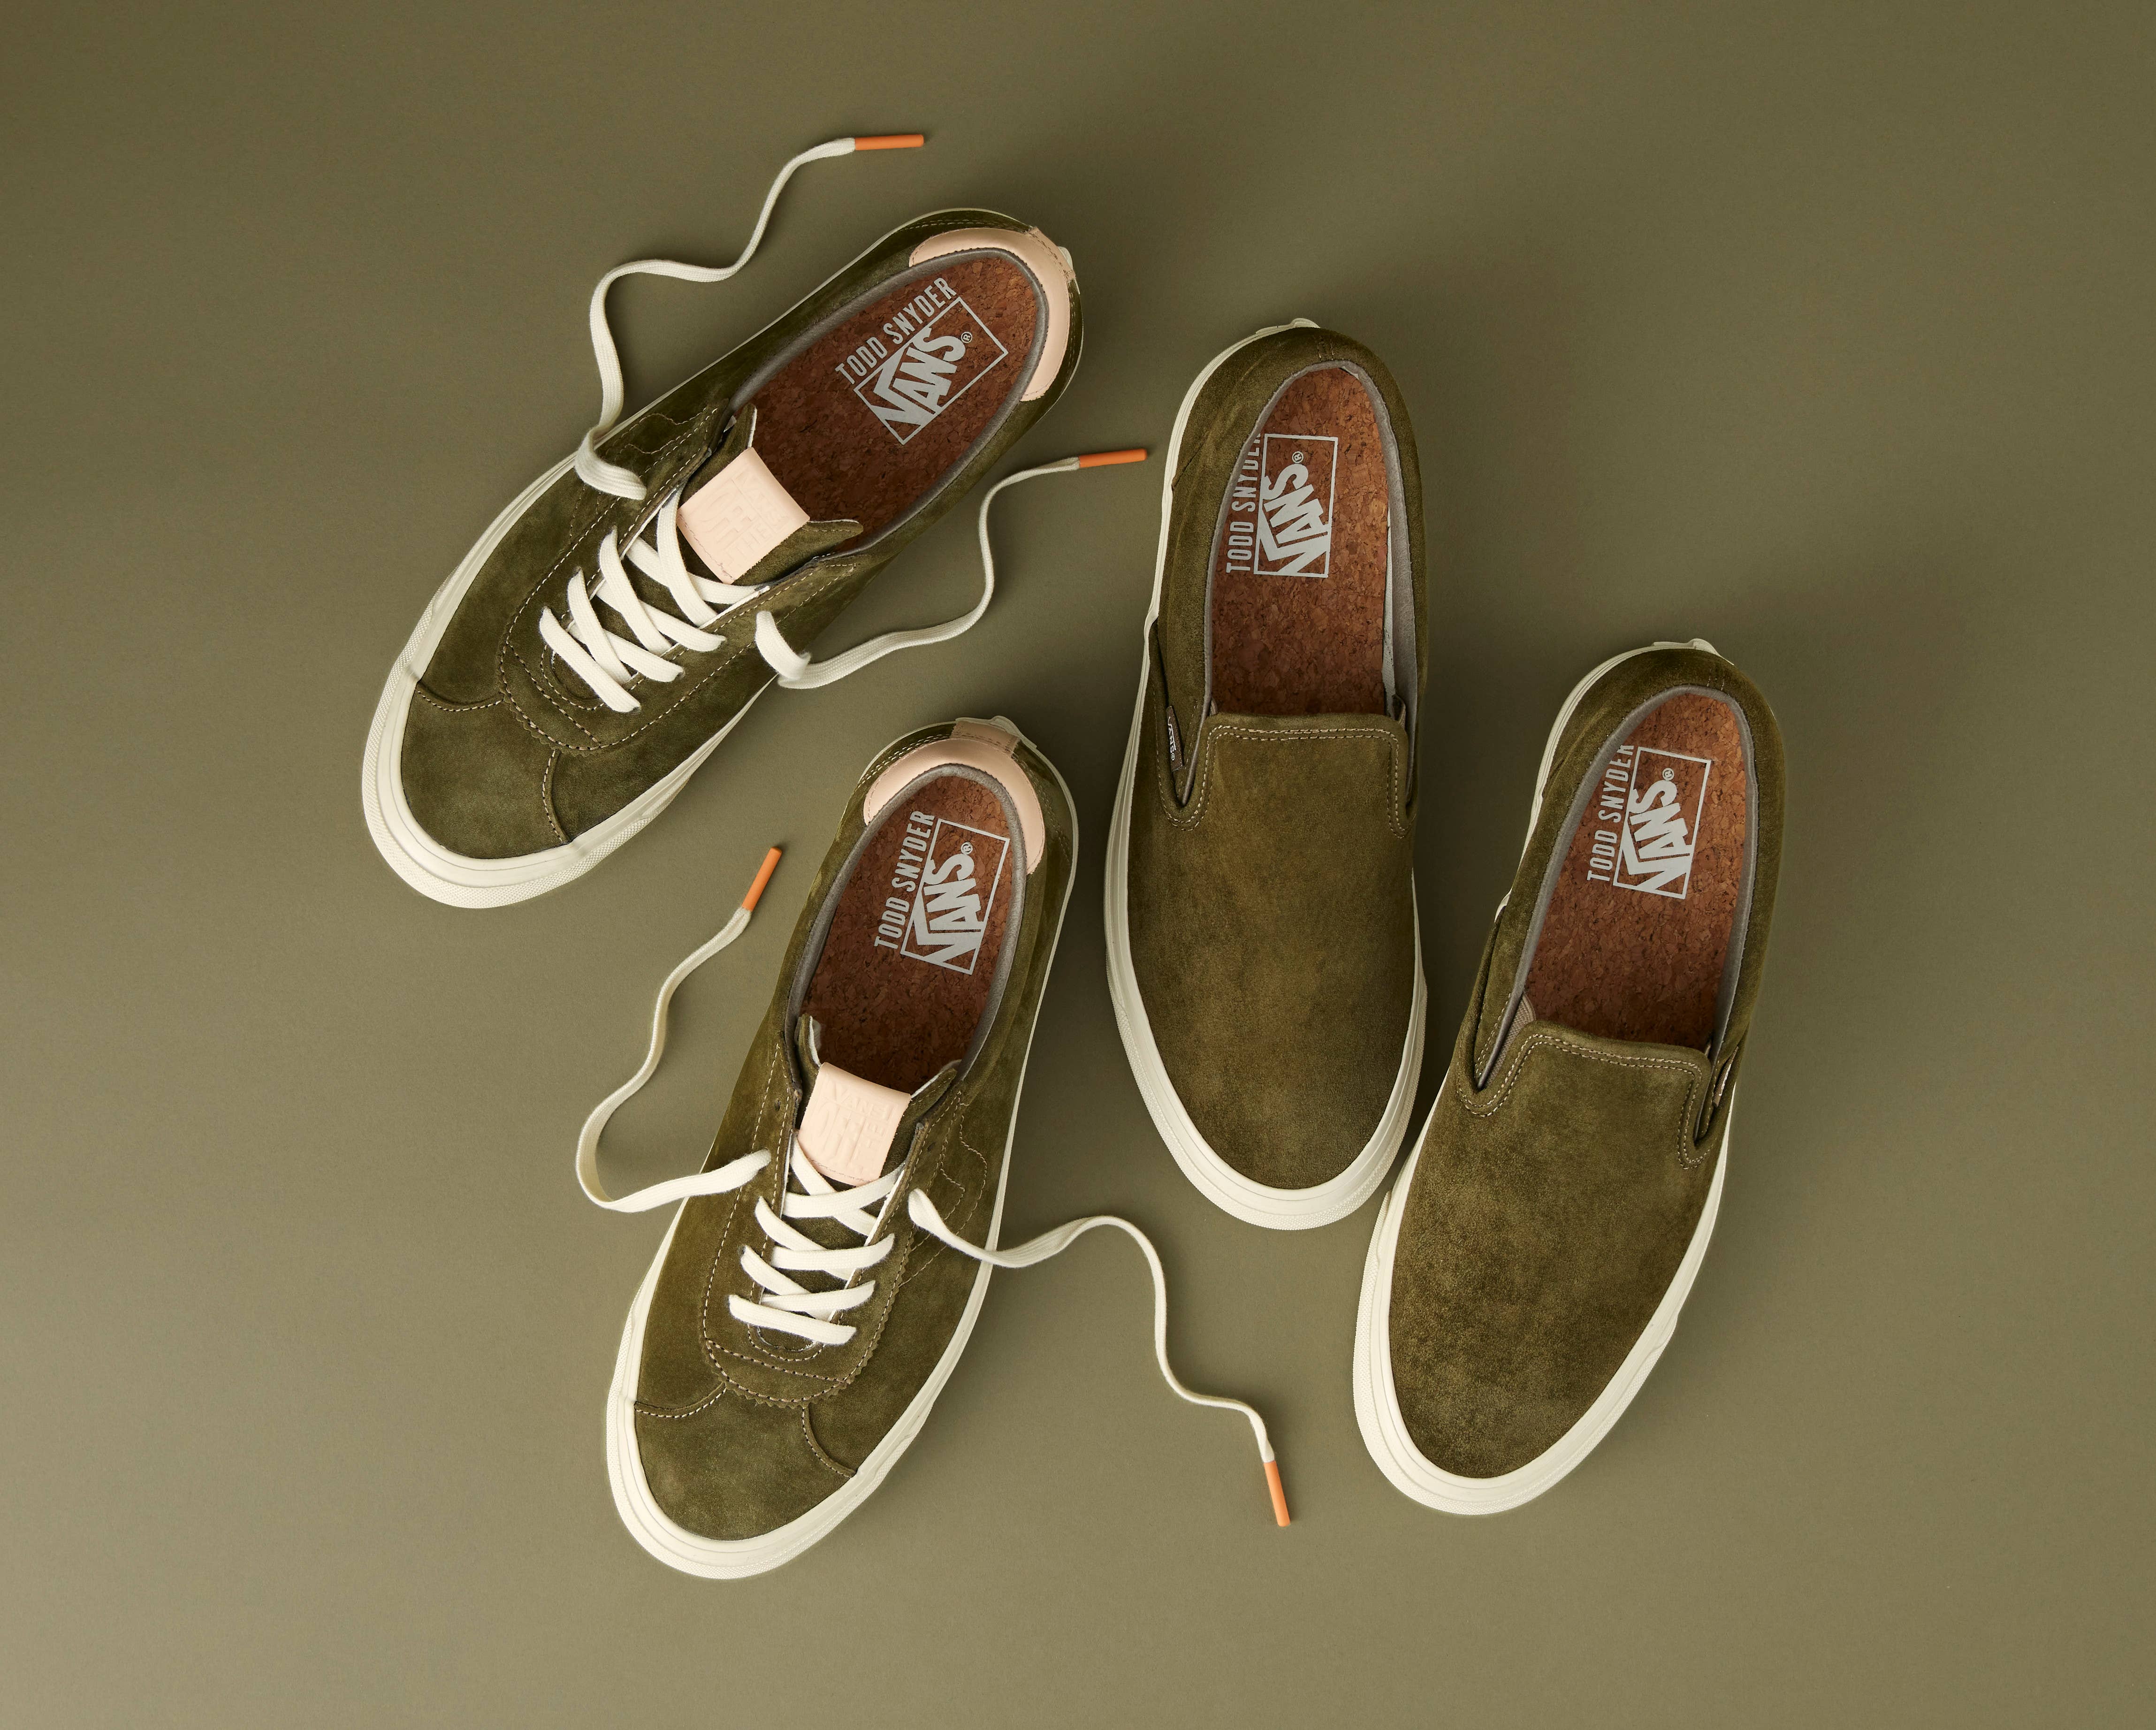 Todd Snyder x Vans 'Dirty Martini' Collection